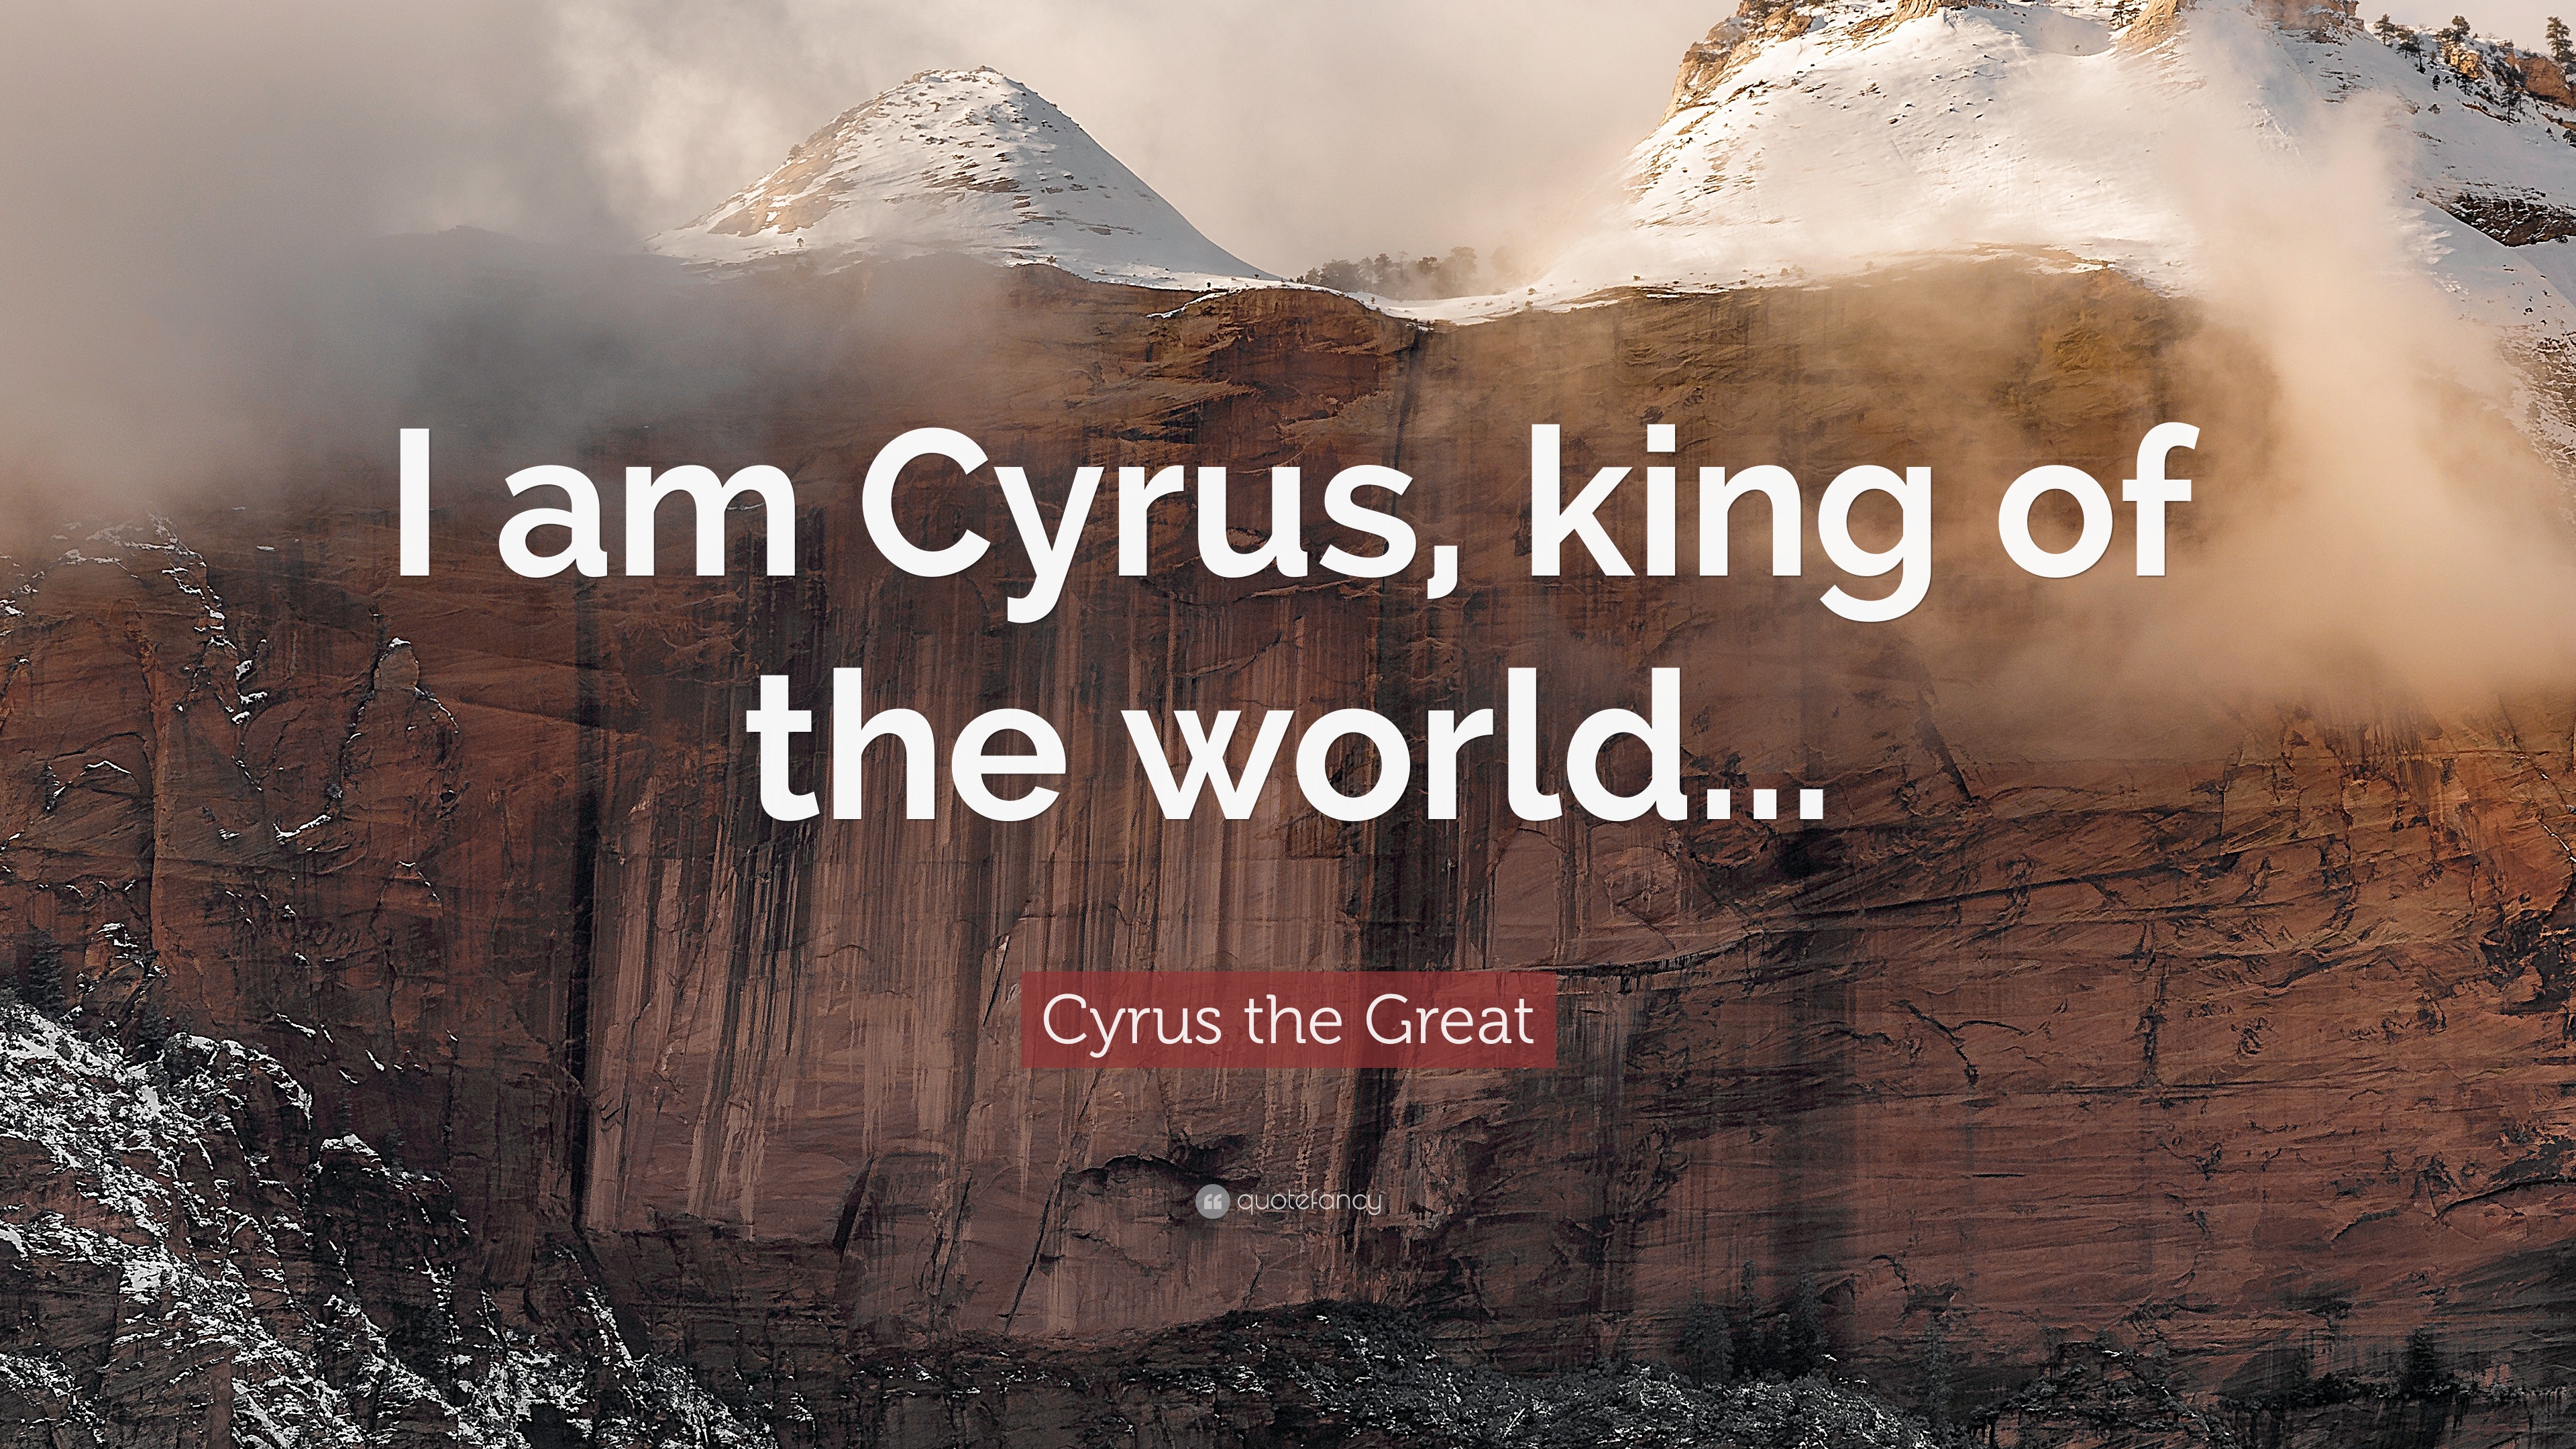 Cyrus the Great Quotes (12 wallpapers) - Quotefancy